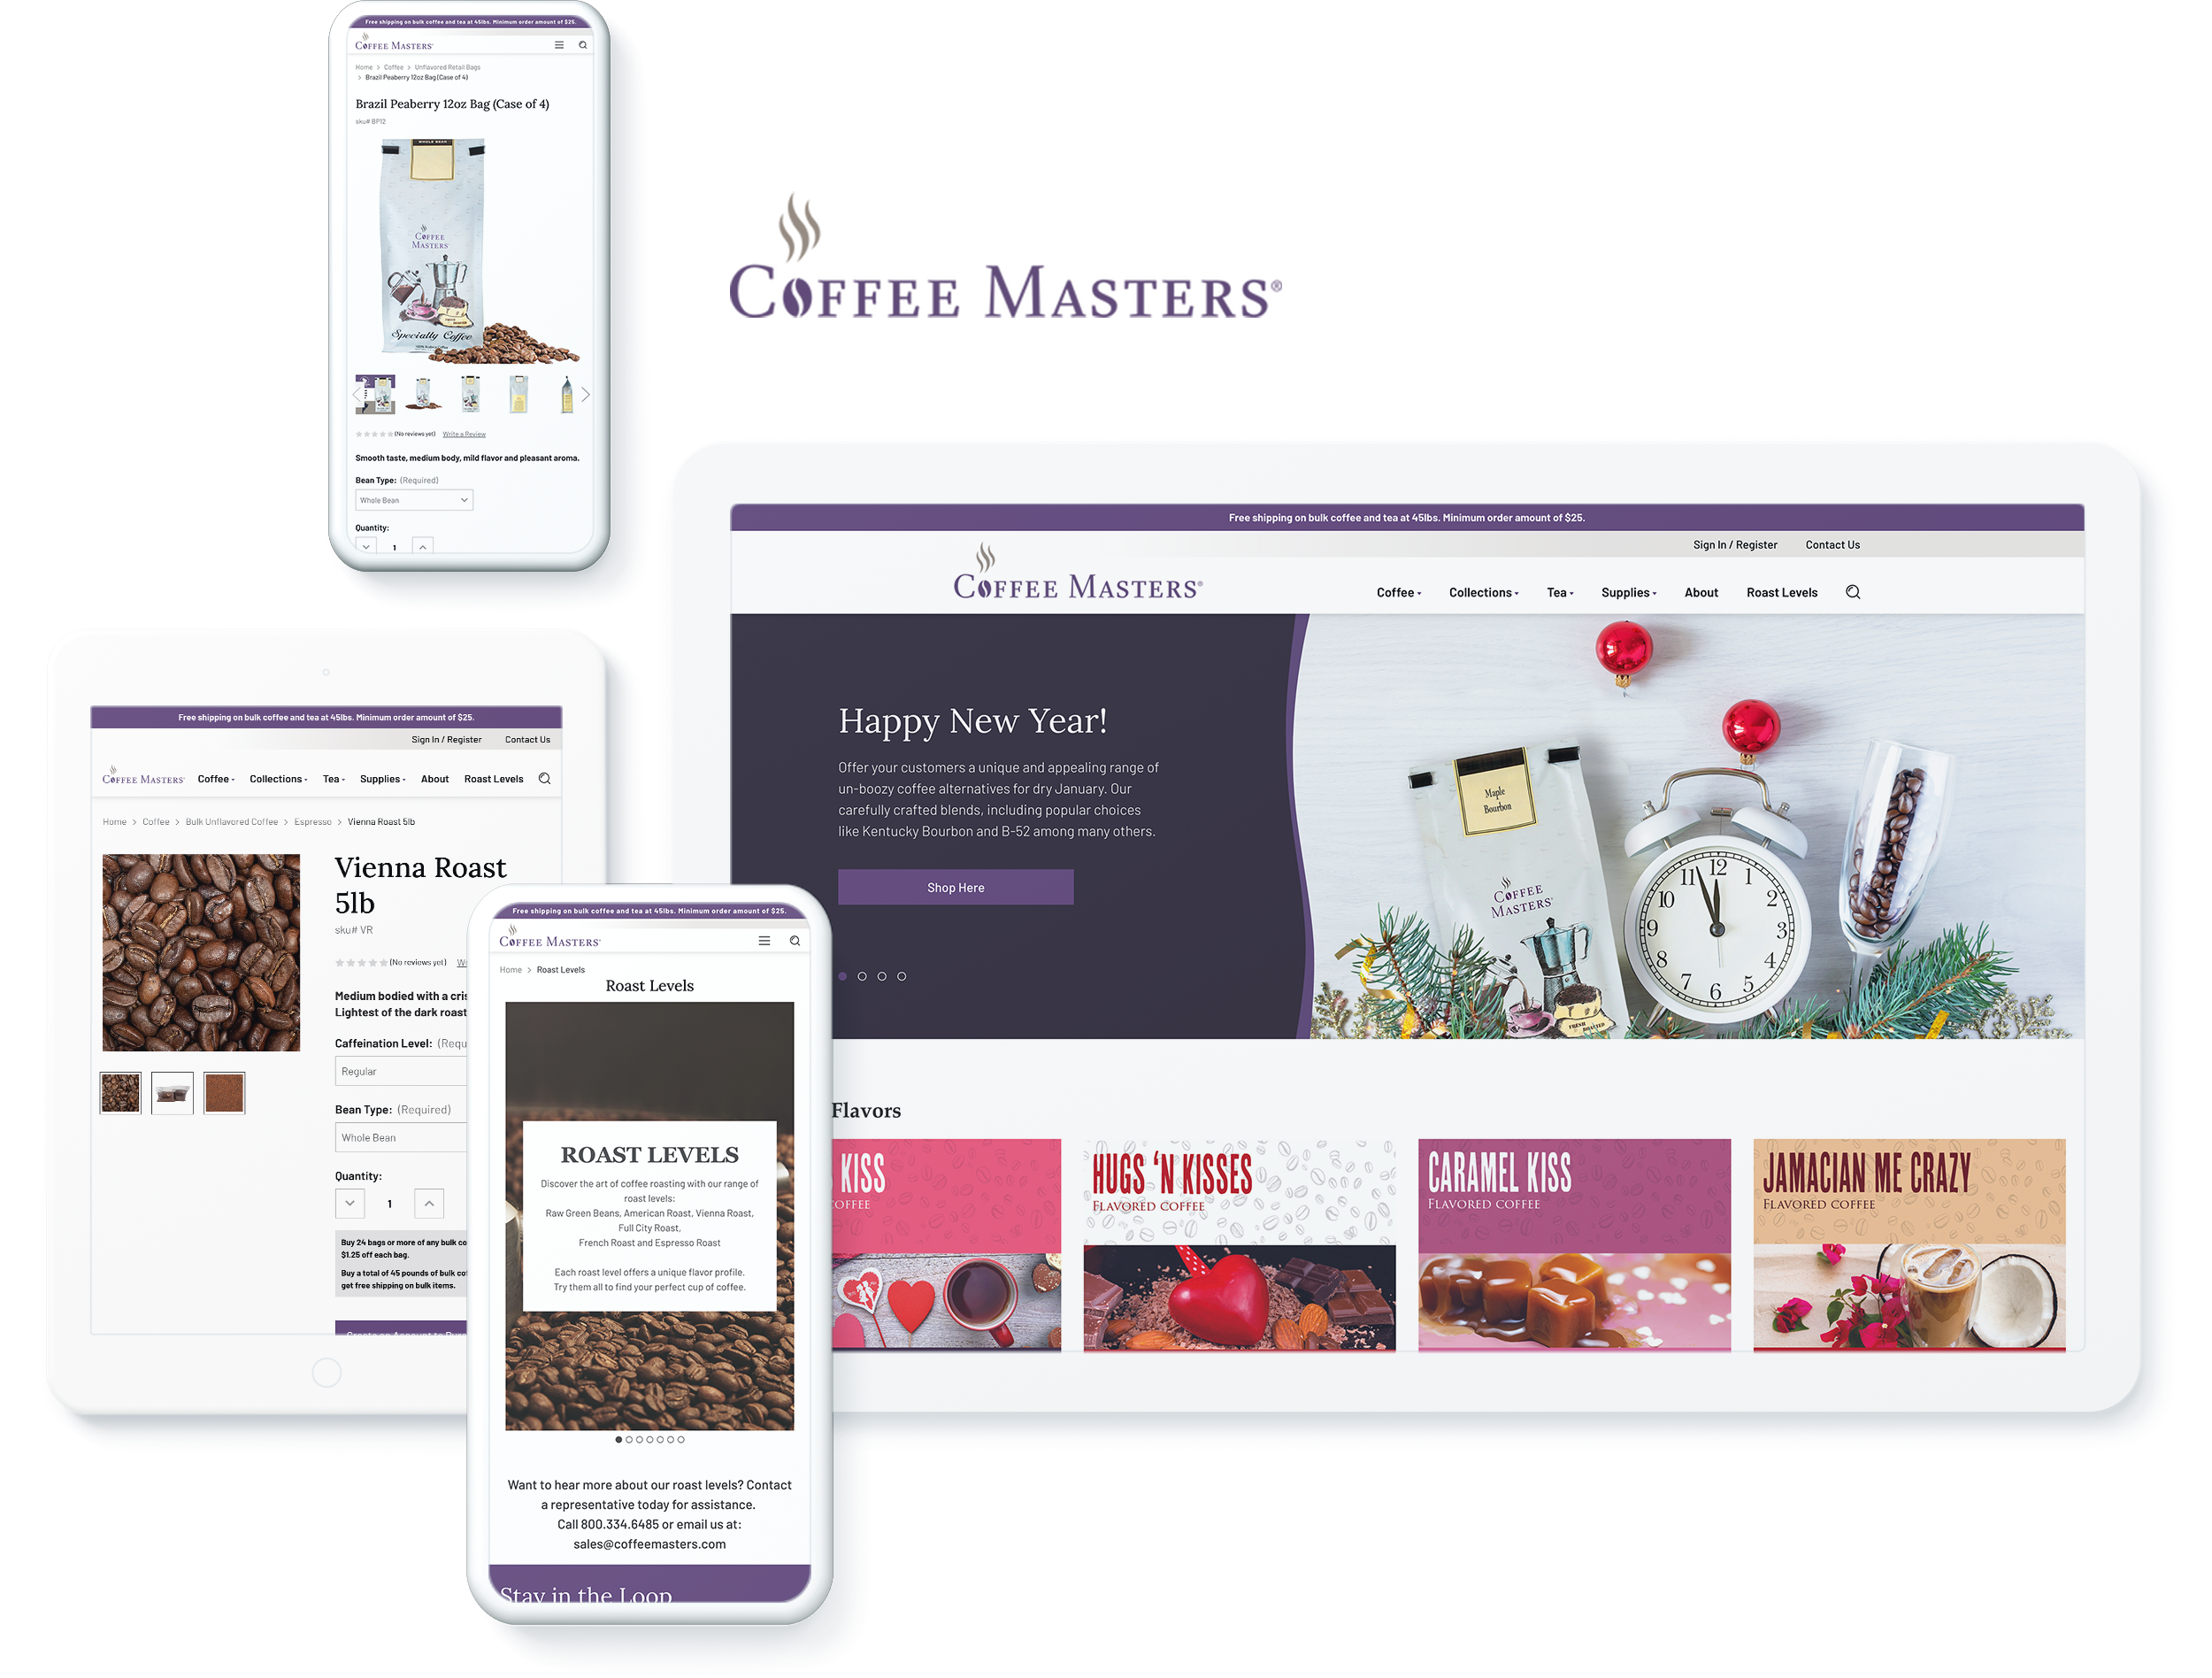 Electronic devices displaying the Coffee Masters website with various coffee products, a holiday greeting, and flavor selections.